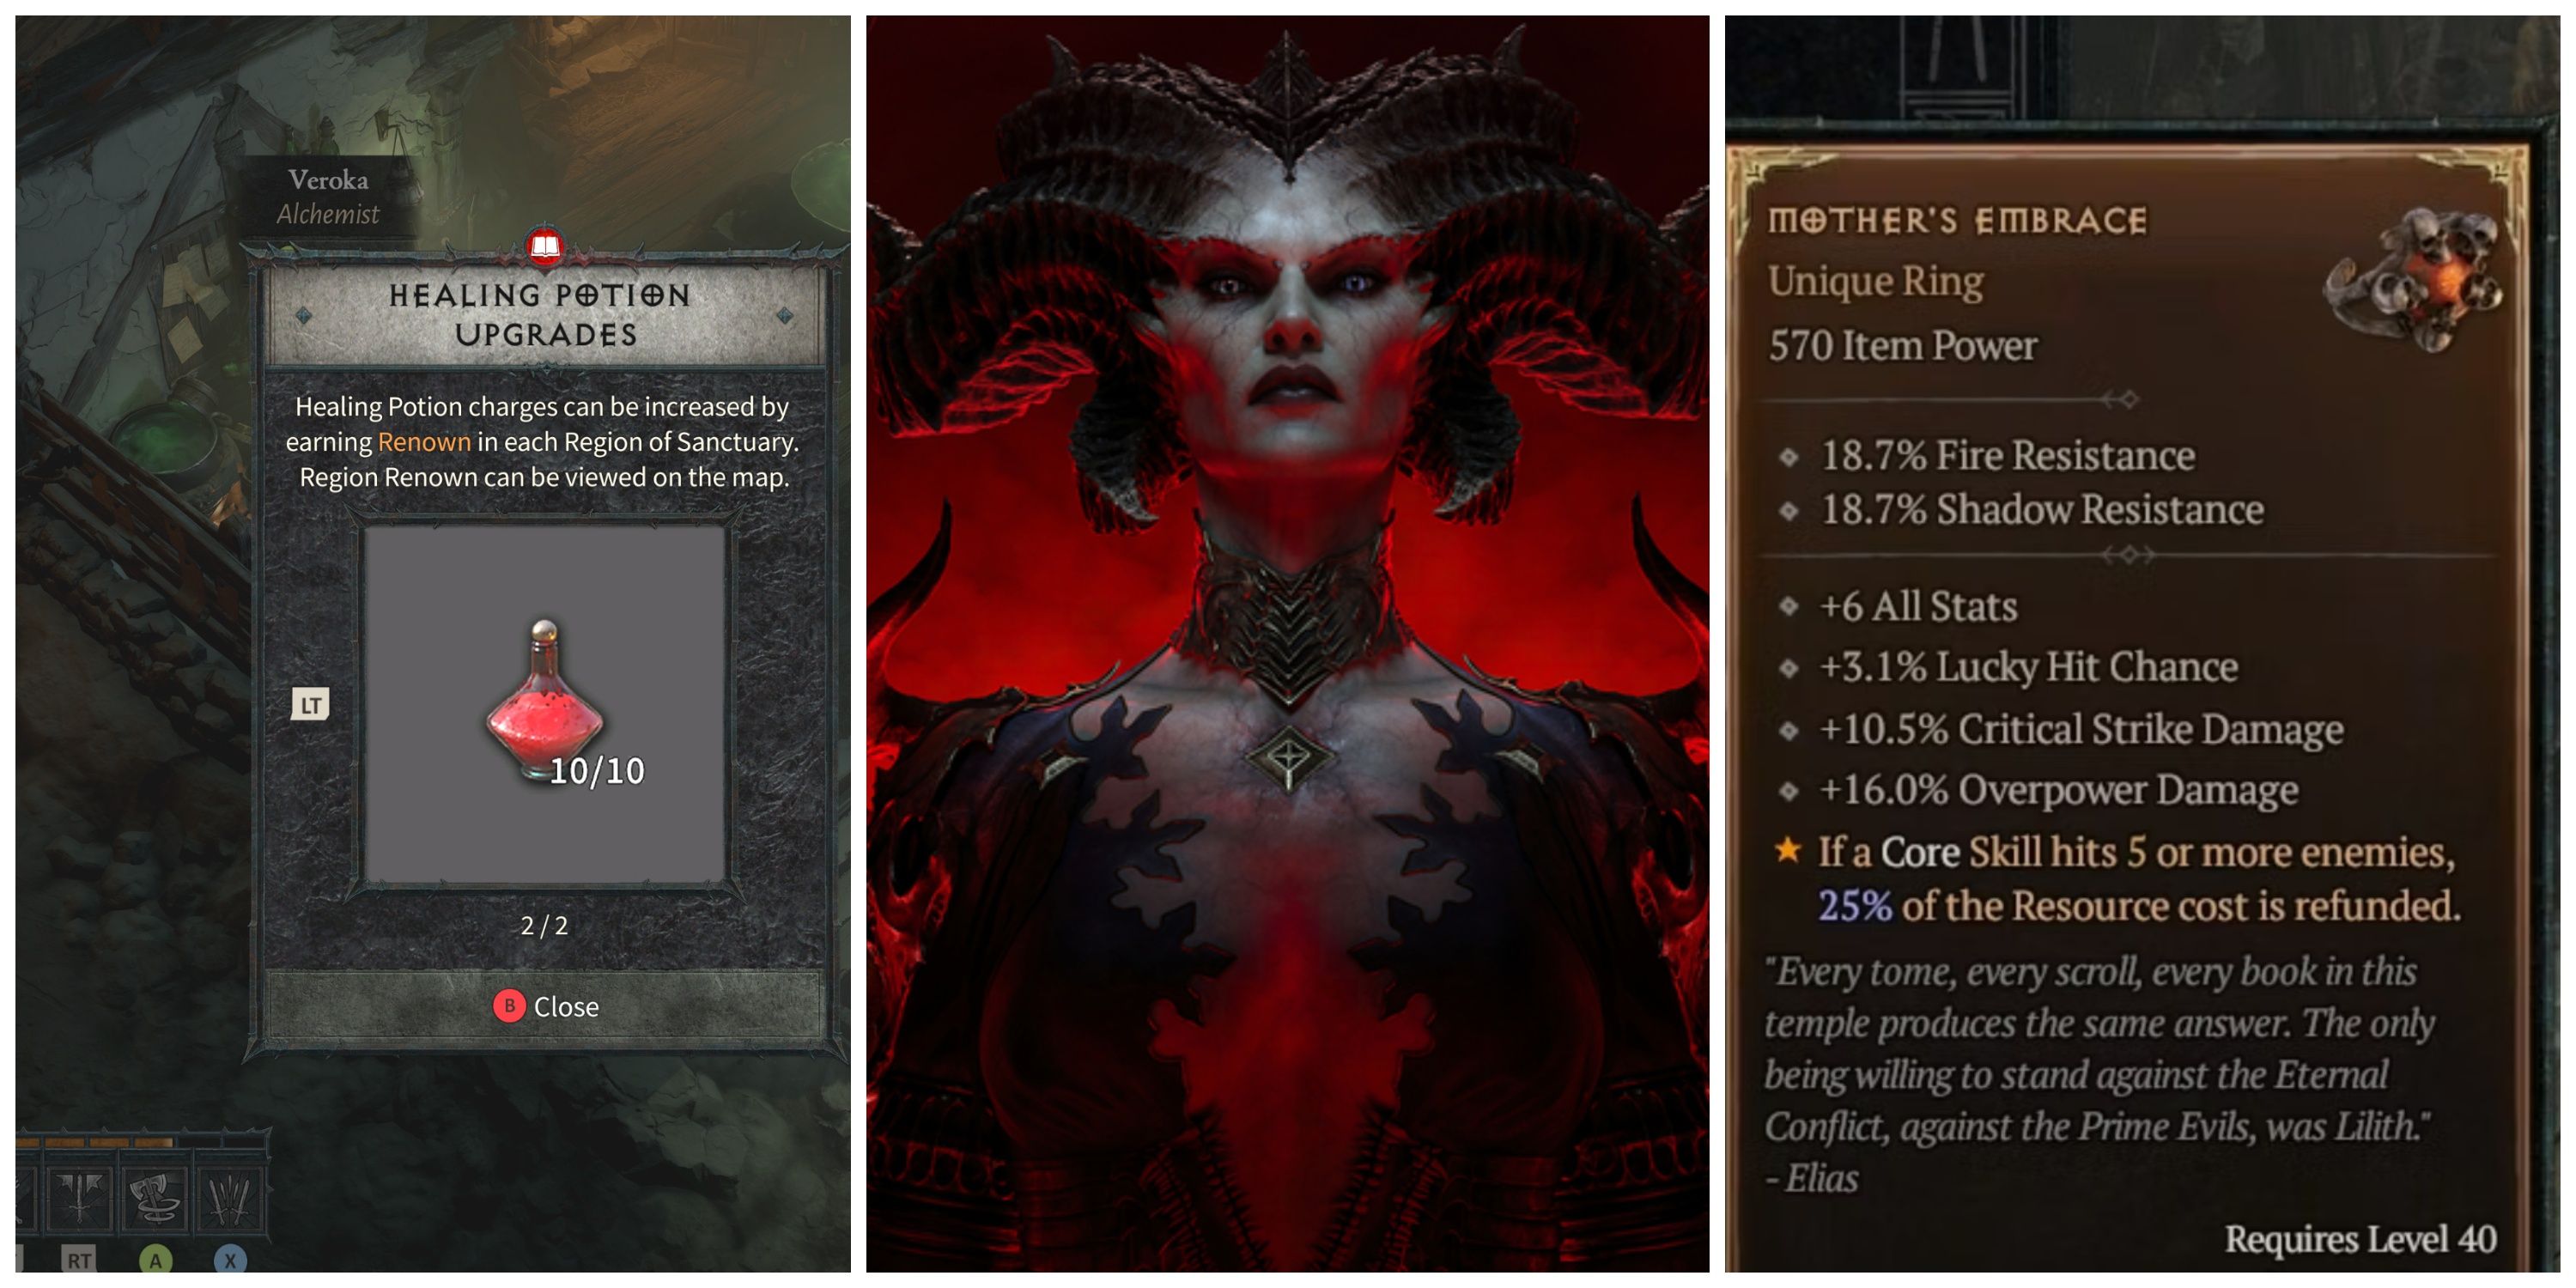 diablo 4 lilith boss, healing potion upgrades, mother's embrace ring unlock